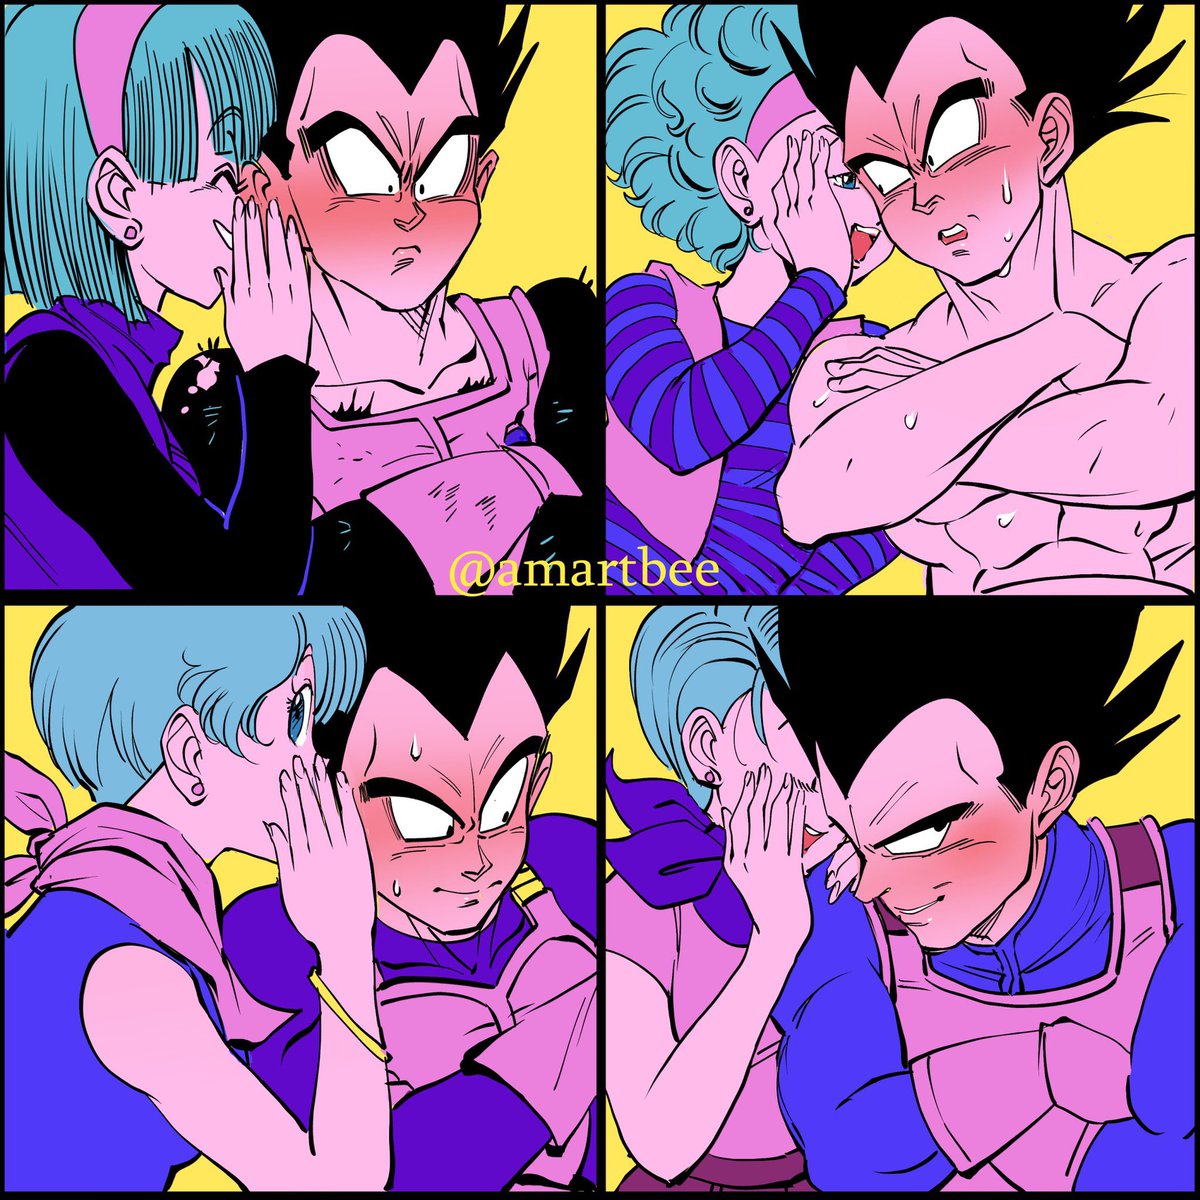 You guys are so cute by liking this vegebul pic.